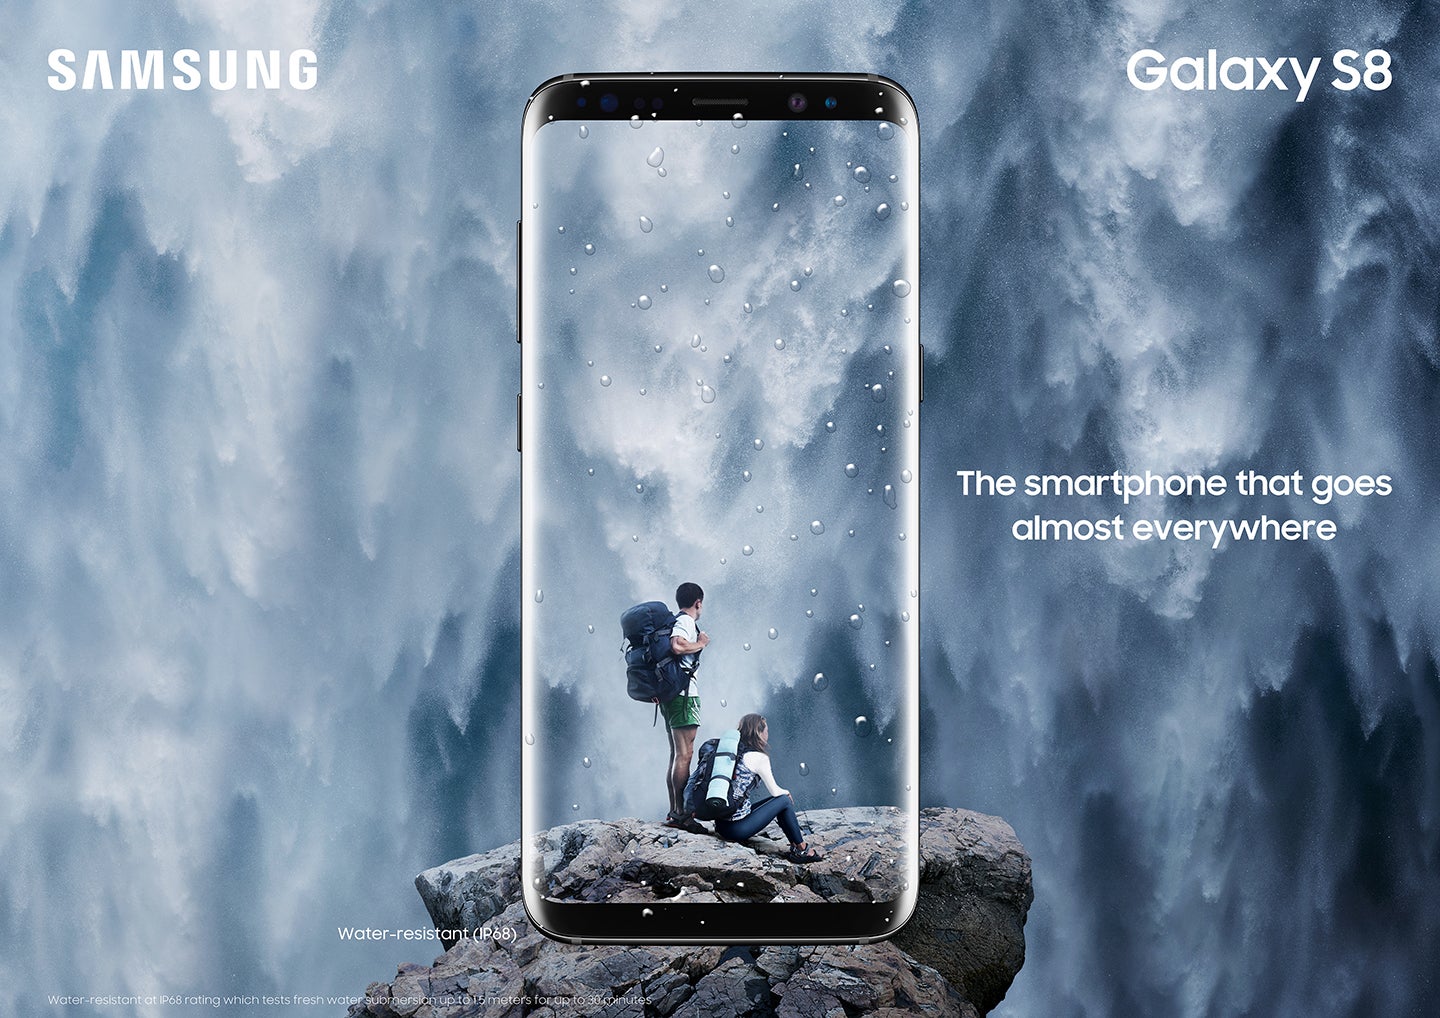 Samsung breathes new life into Galaxy S8 with revamped design